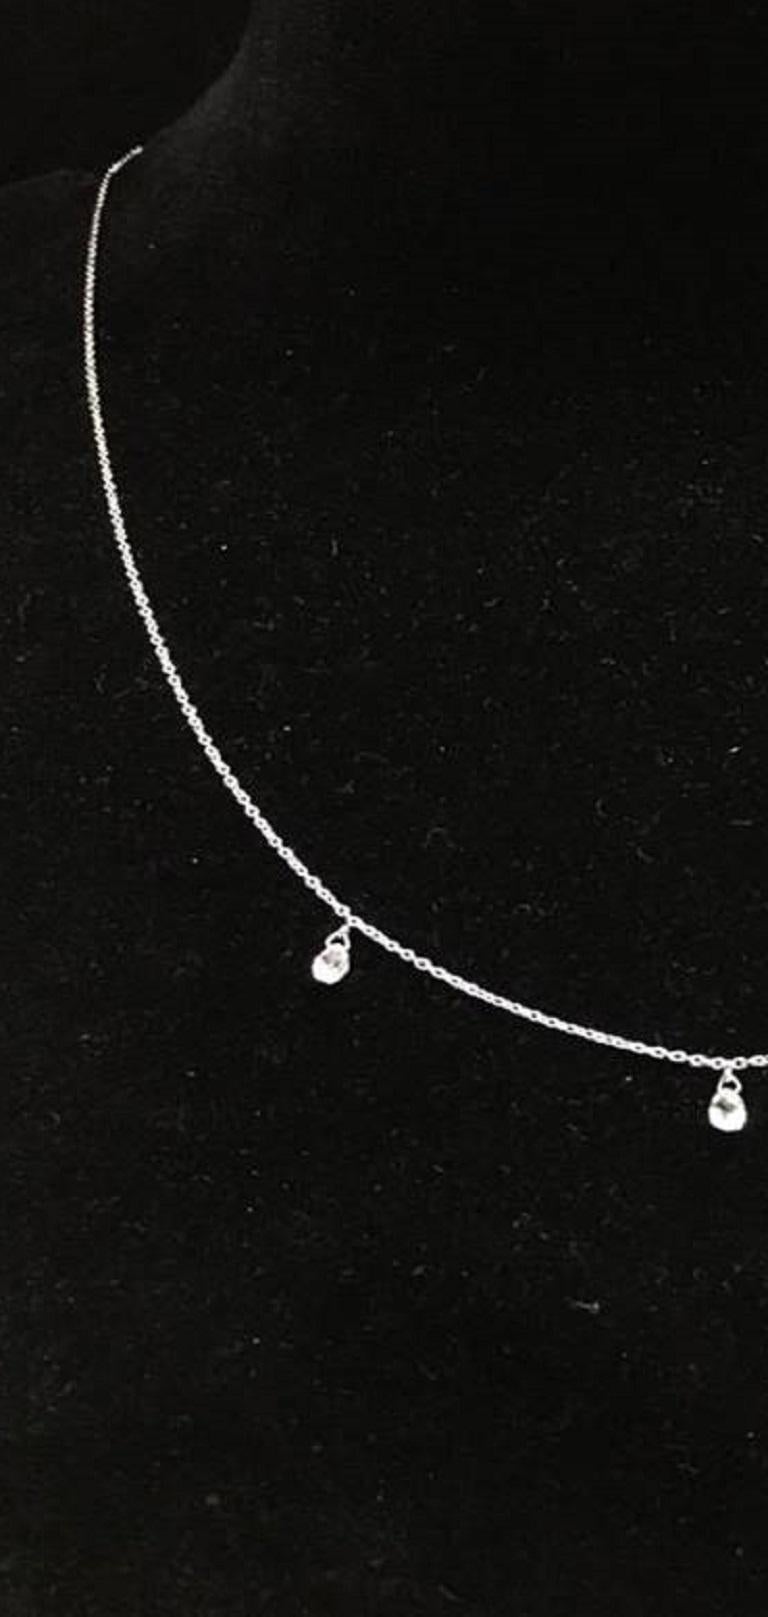 PANIM 3 Dancing Diamond Briolettes 18K White Gold Mille Etoiles Necklace

This necklace feature 3 white diamond full drops cut as 